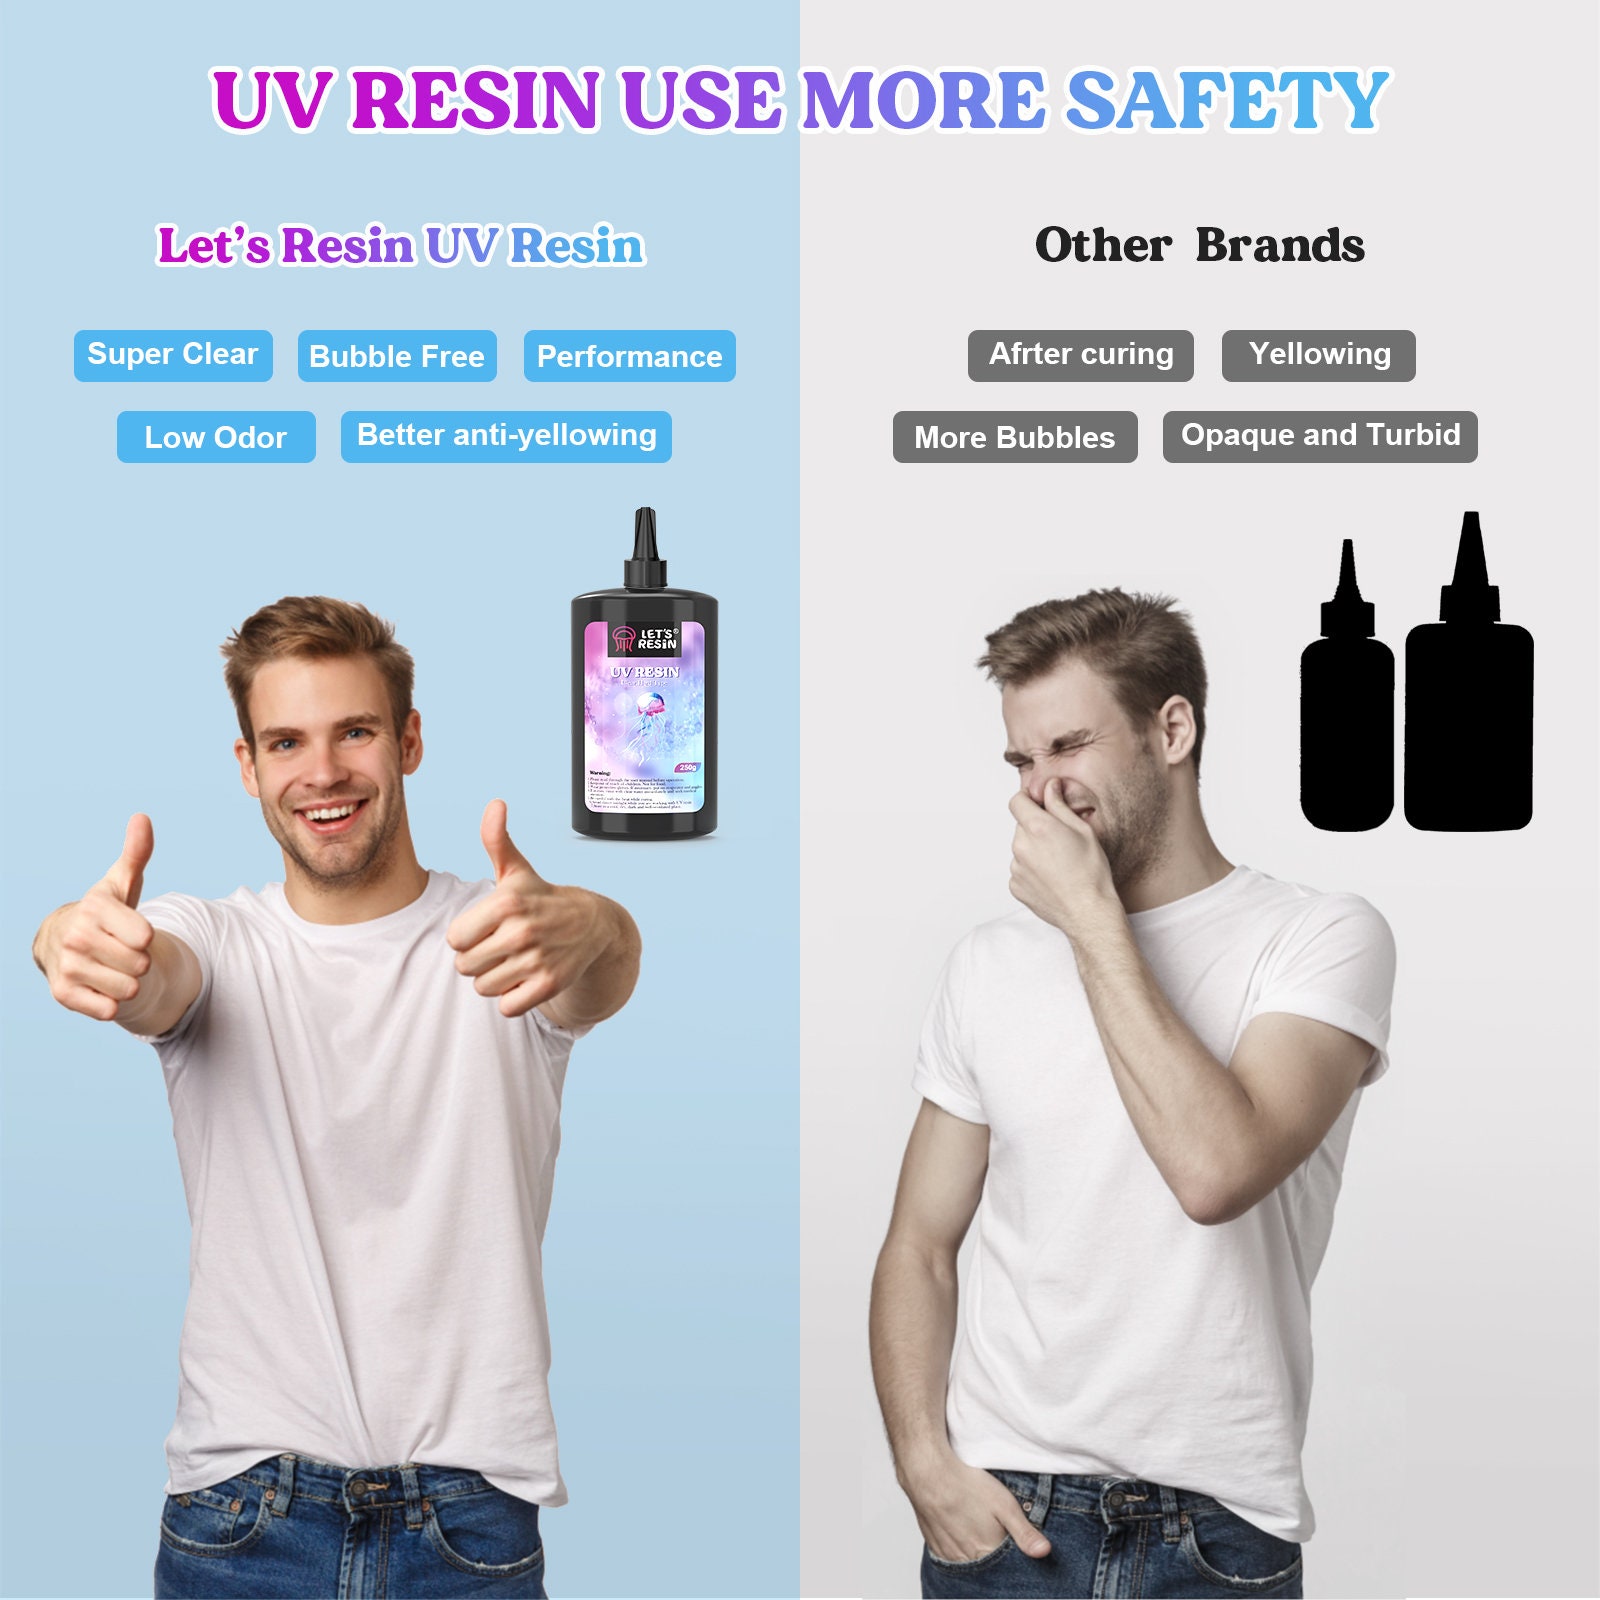 LETS RESIN UV Resin Kit with Light Bonding&Curing in Seconds 25g